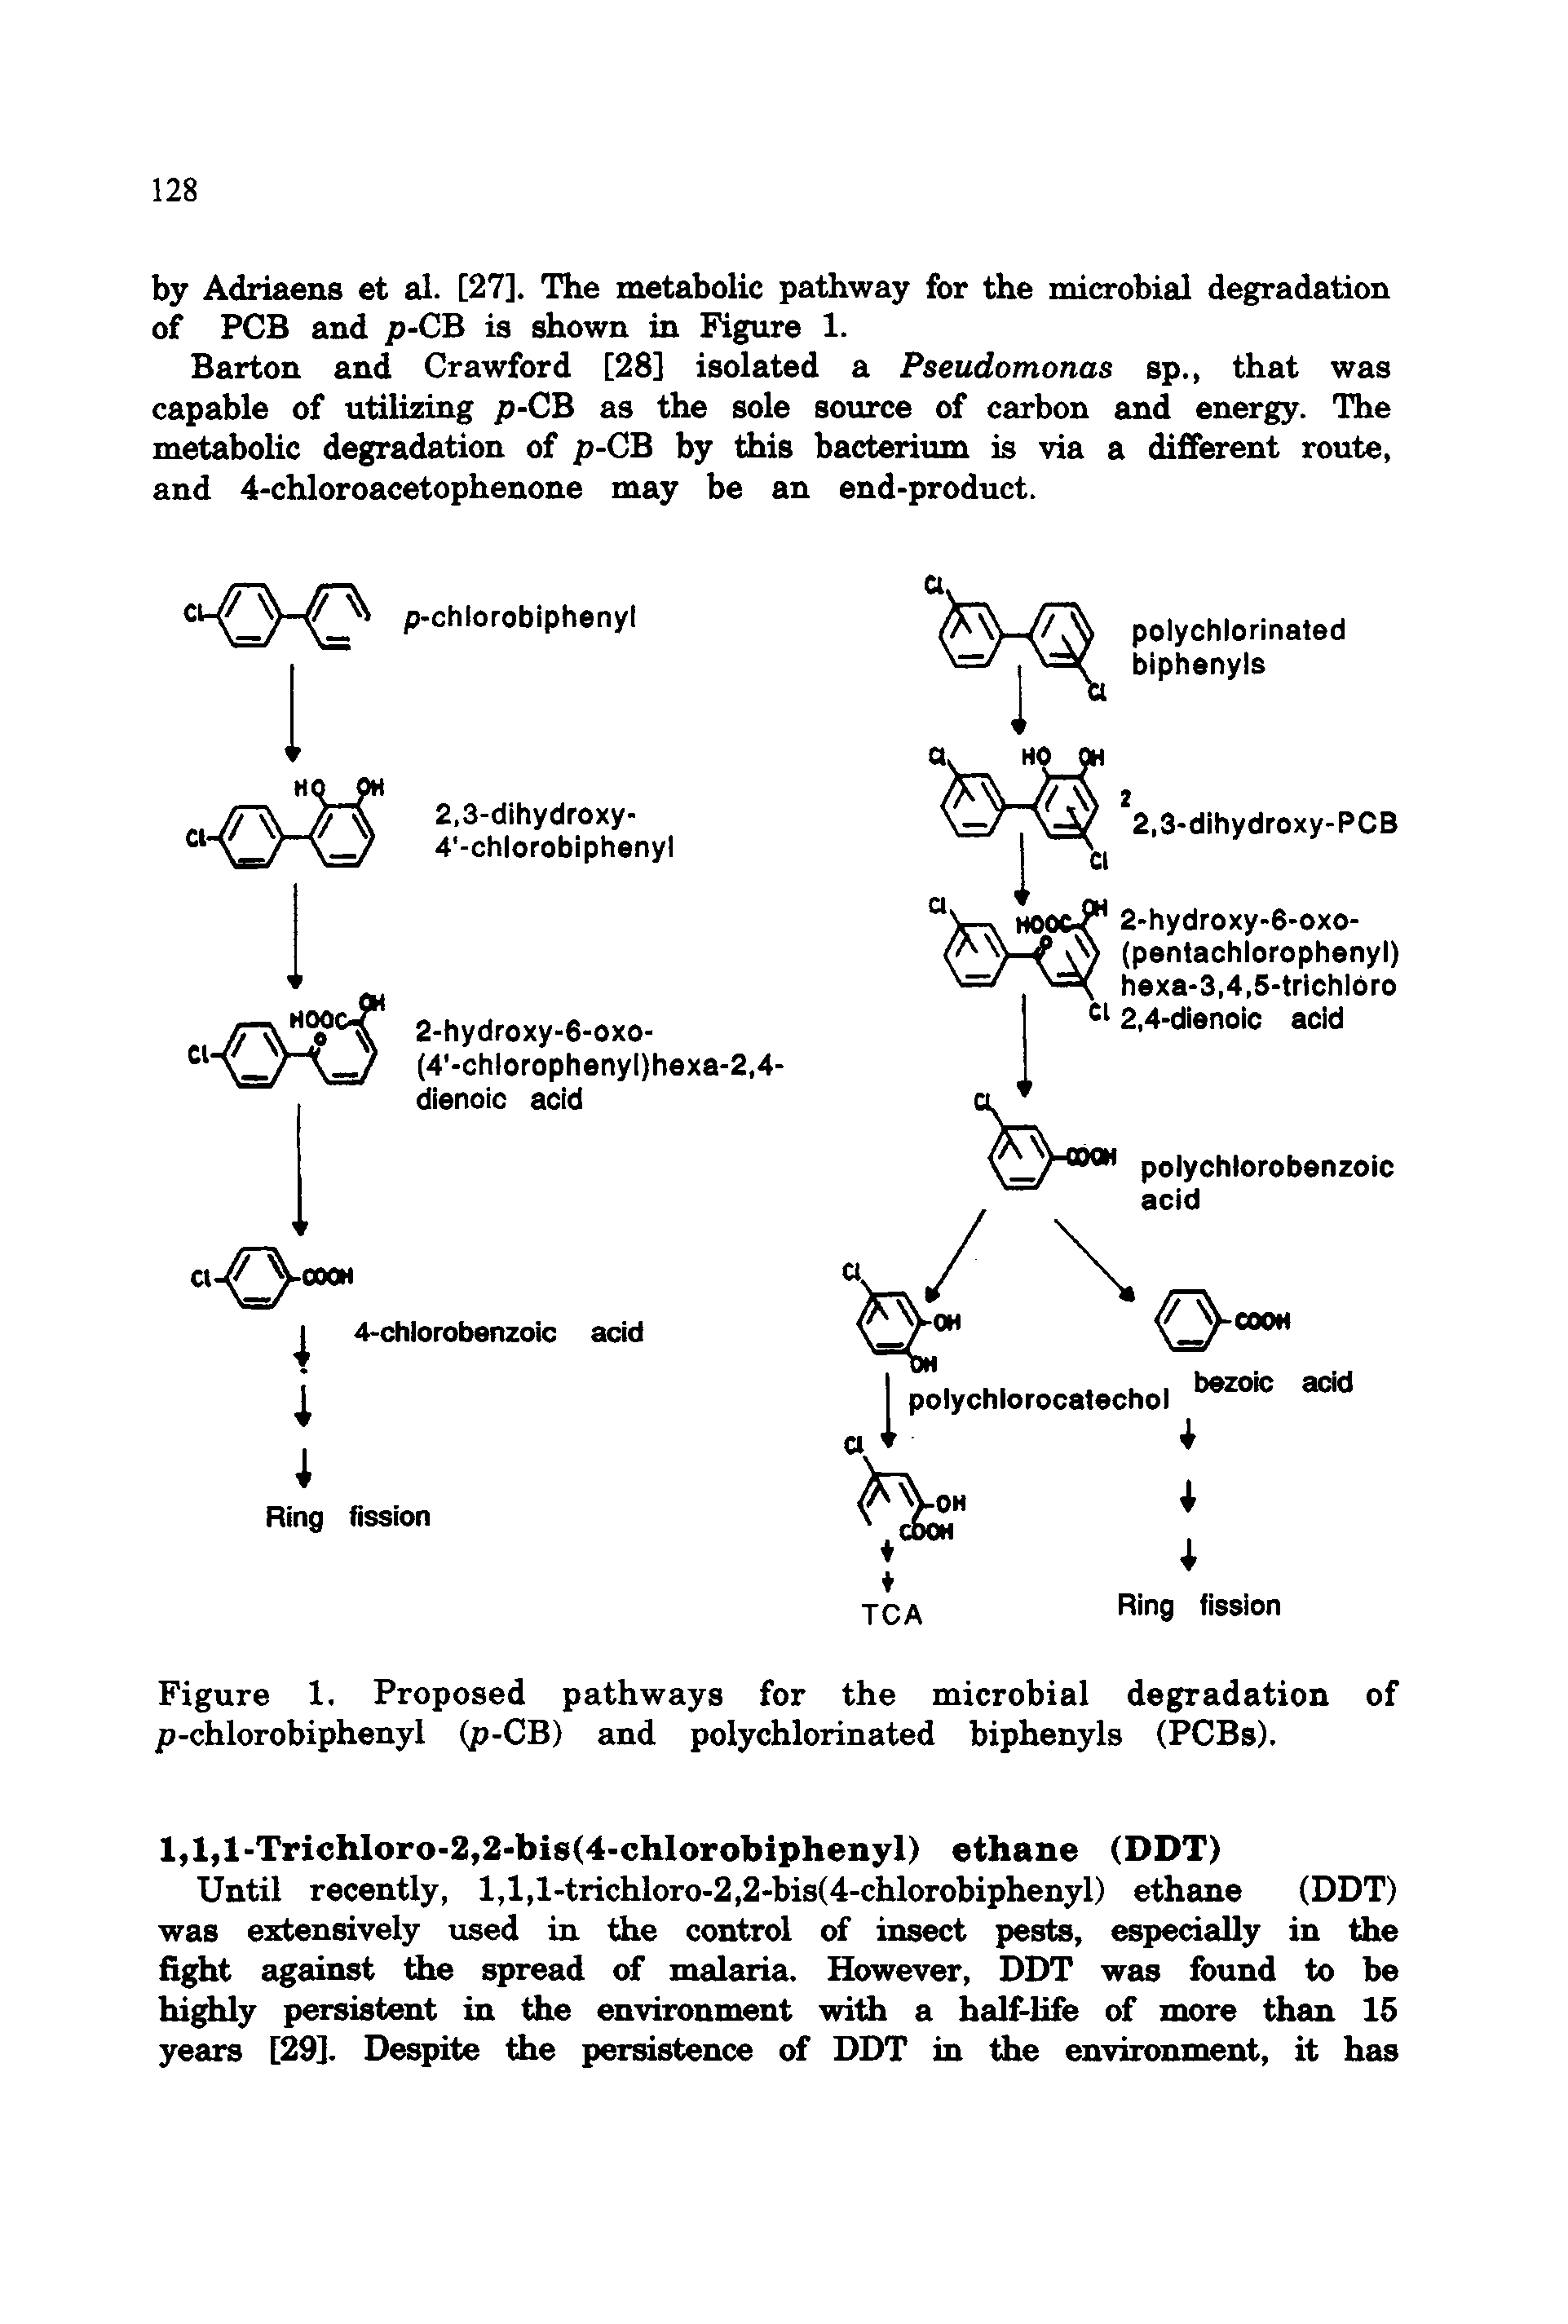 Figure 1. Proposed pathways for the microbial degradation of p-chlorobiphenyl (p-CB) and polychlorinated biphenyls (PCBs).